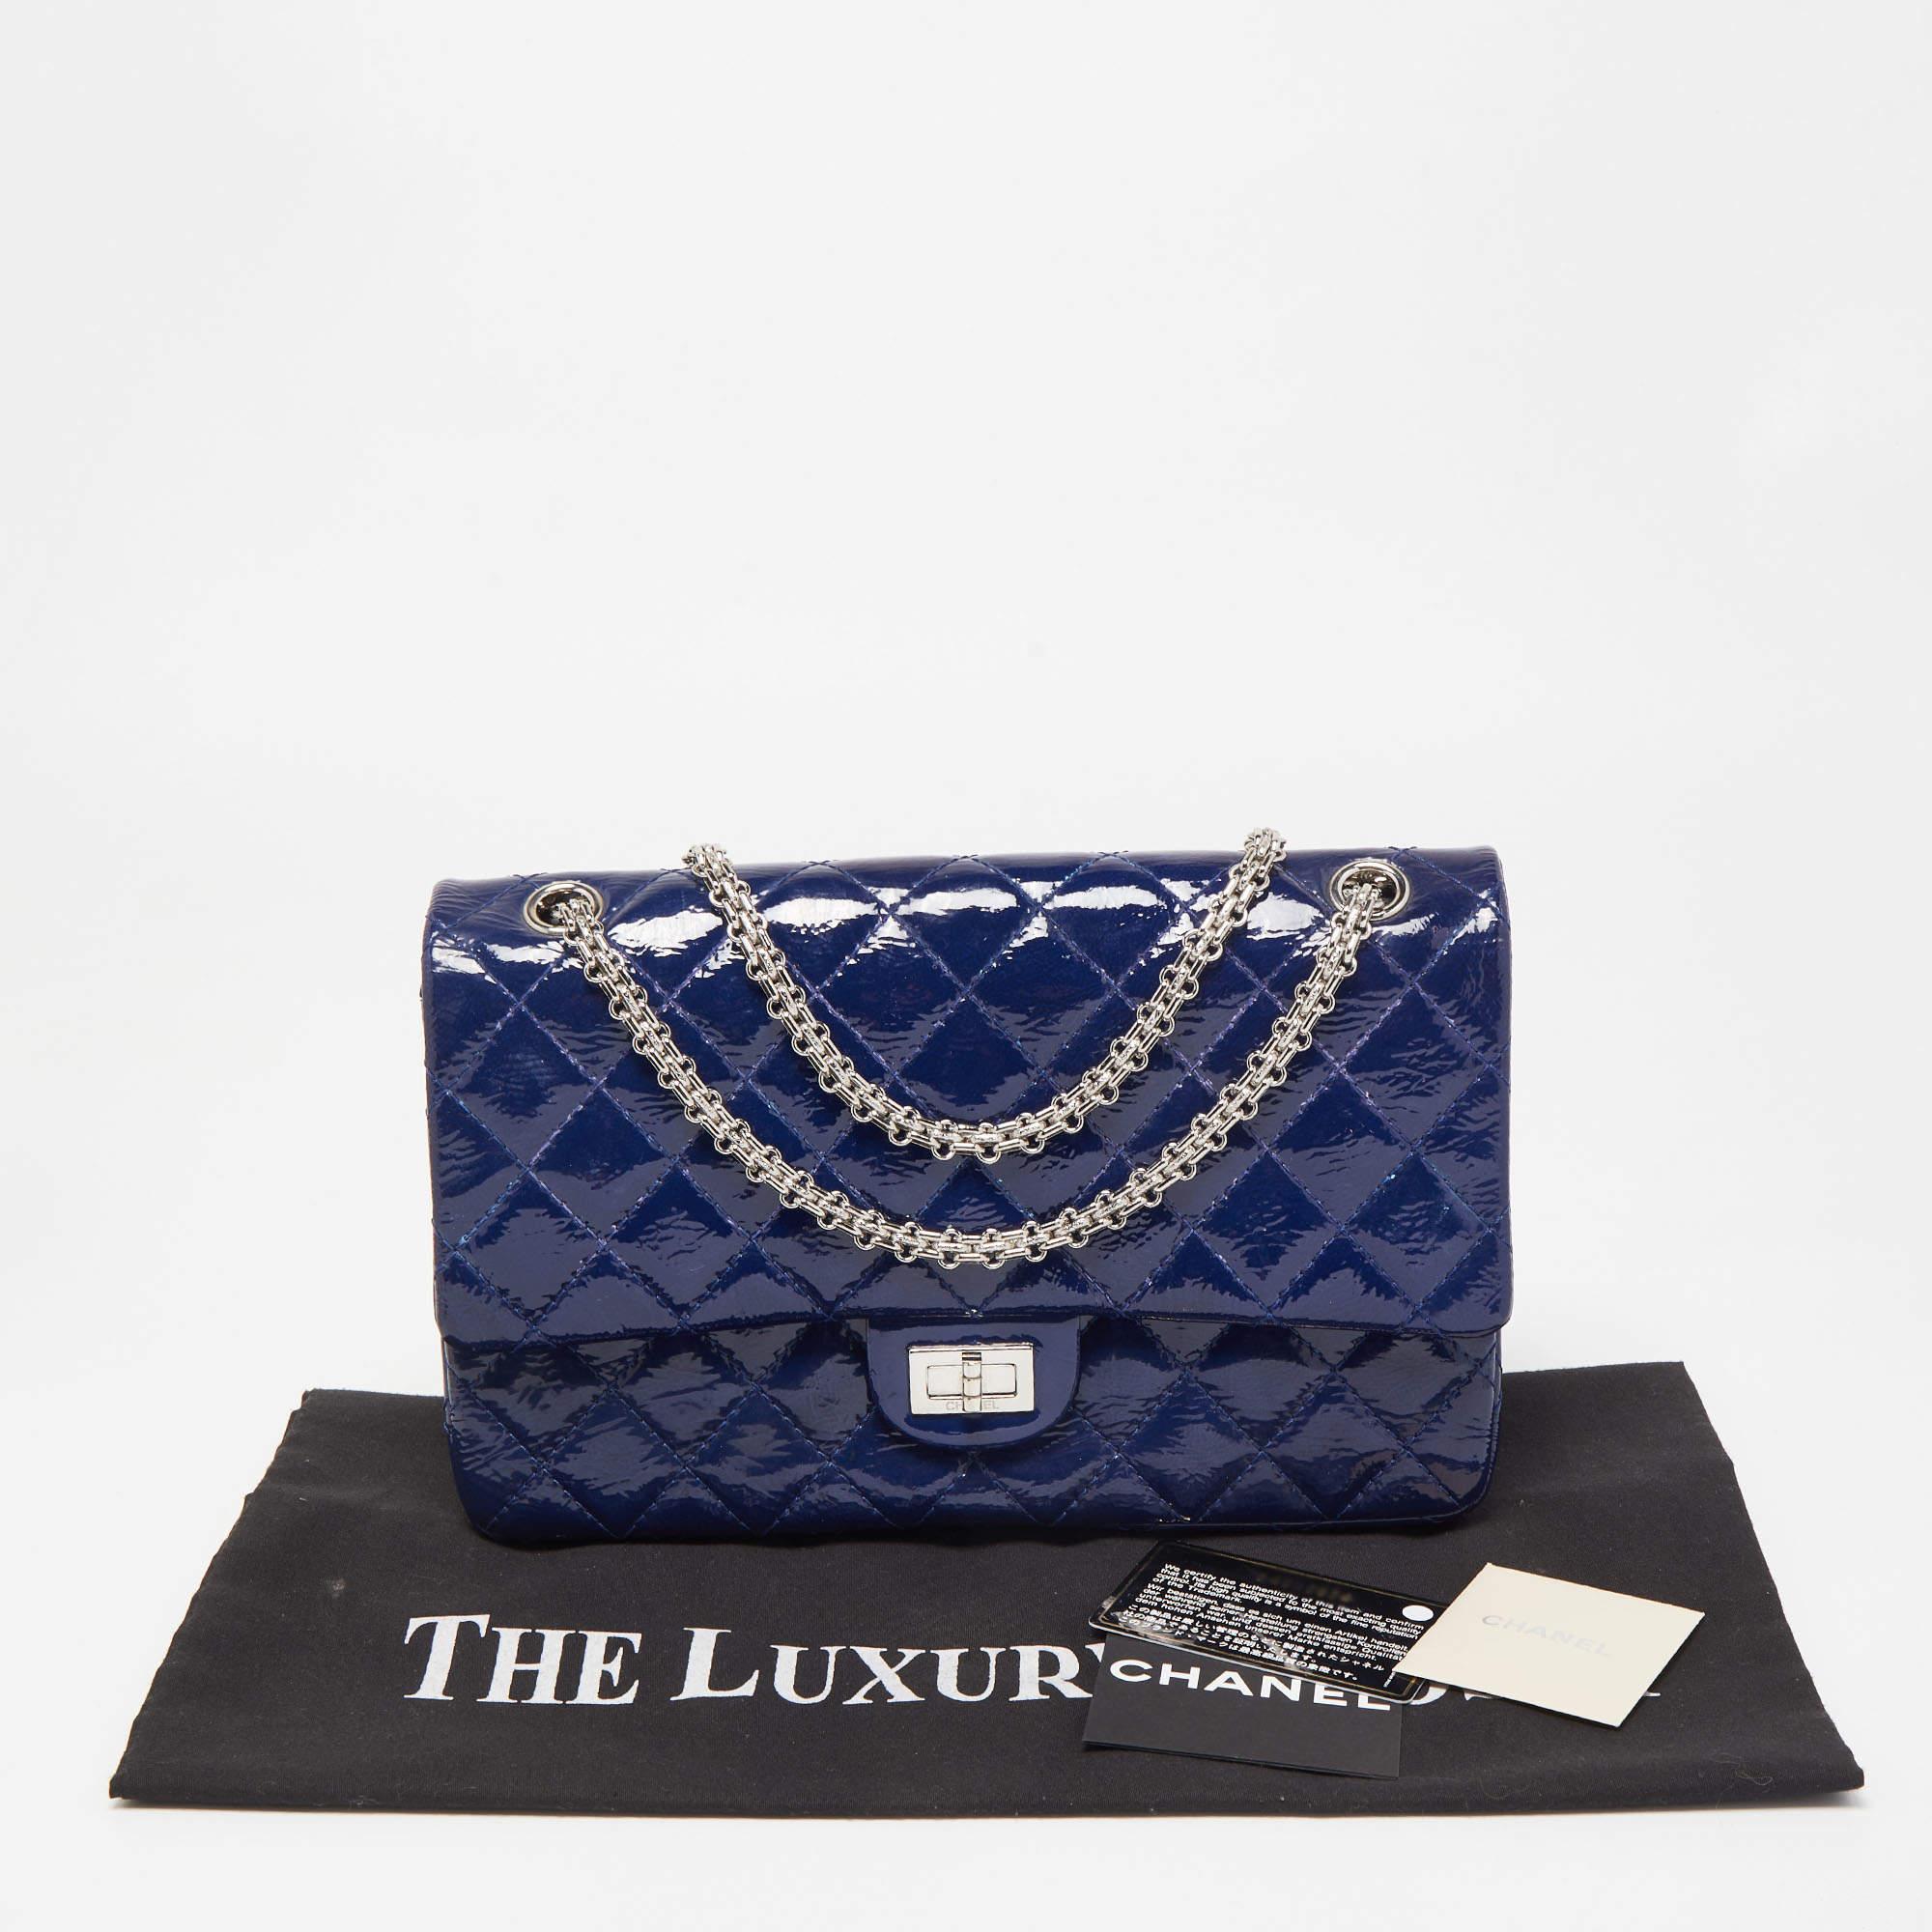 Chanel Blue Quilted Patent Leather Reissue 2.55 Classic 226 Flap Bag In Good Condition For Sale In Dubai, Al Qouz 2